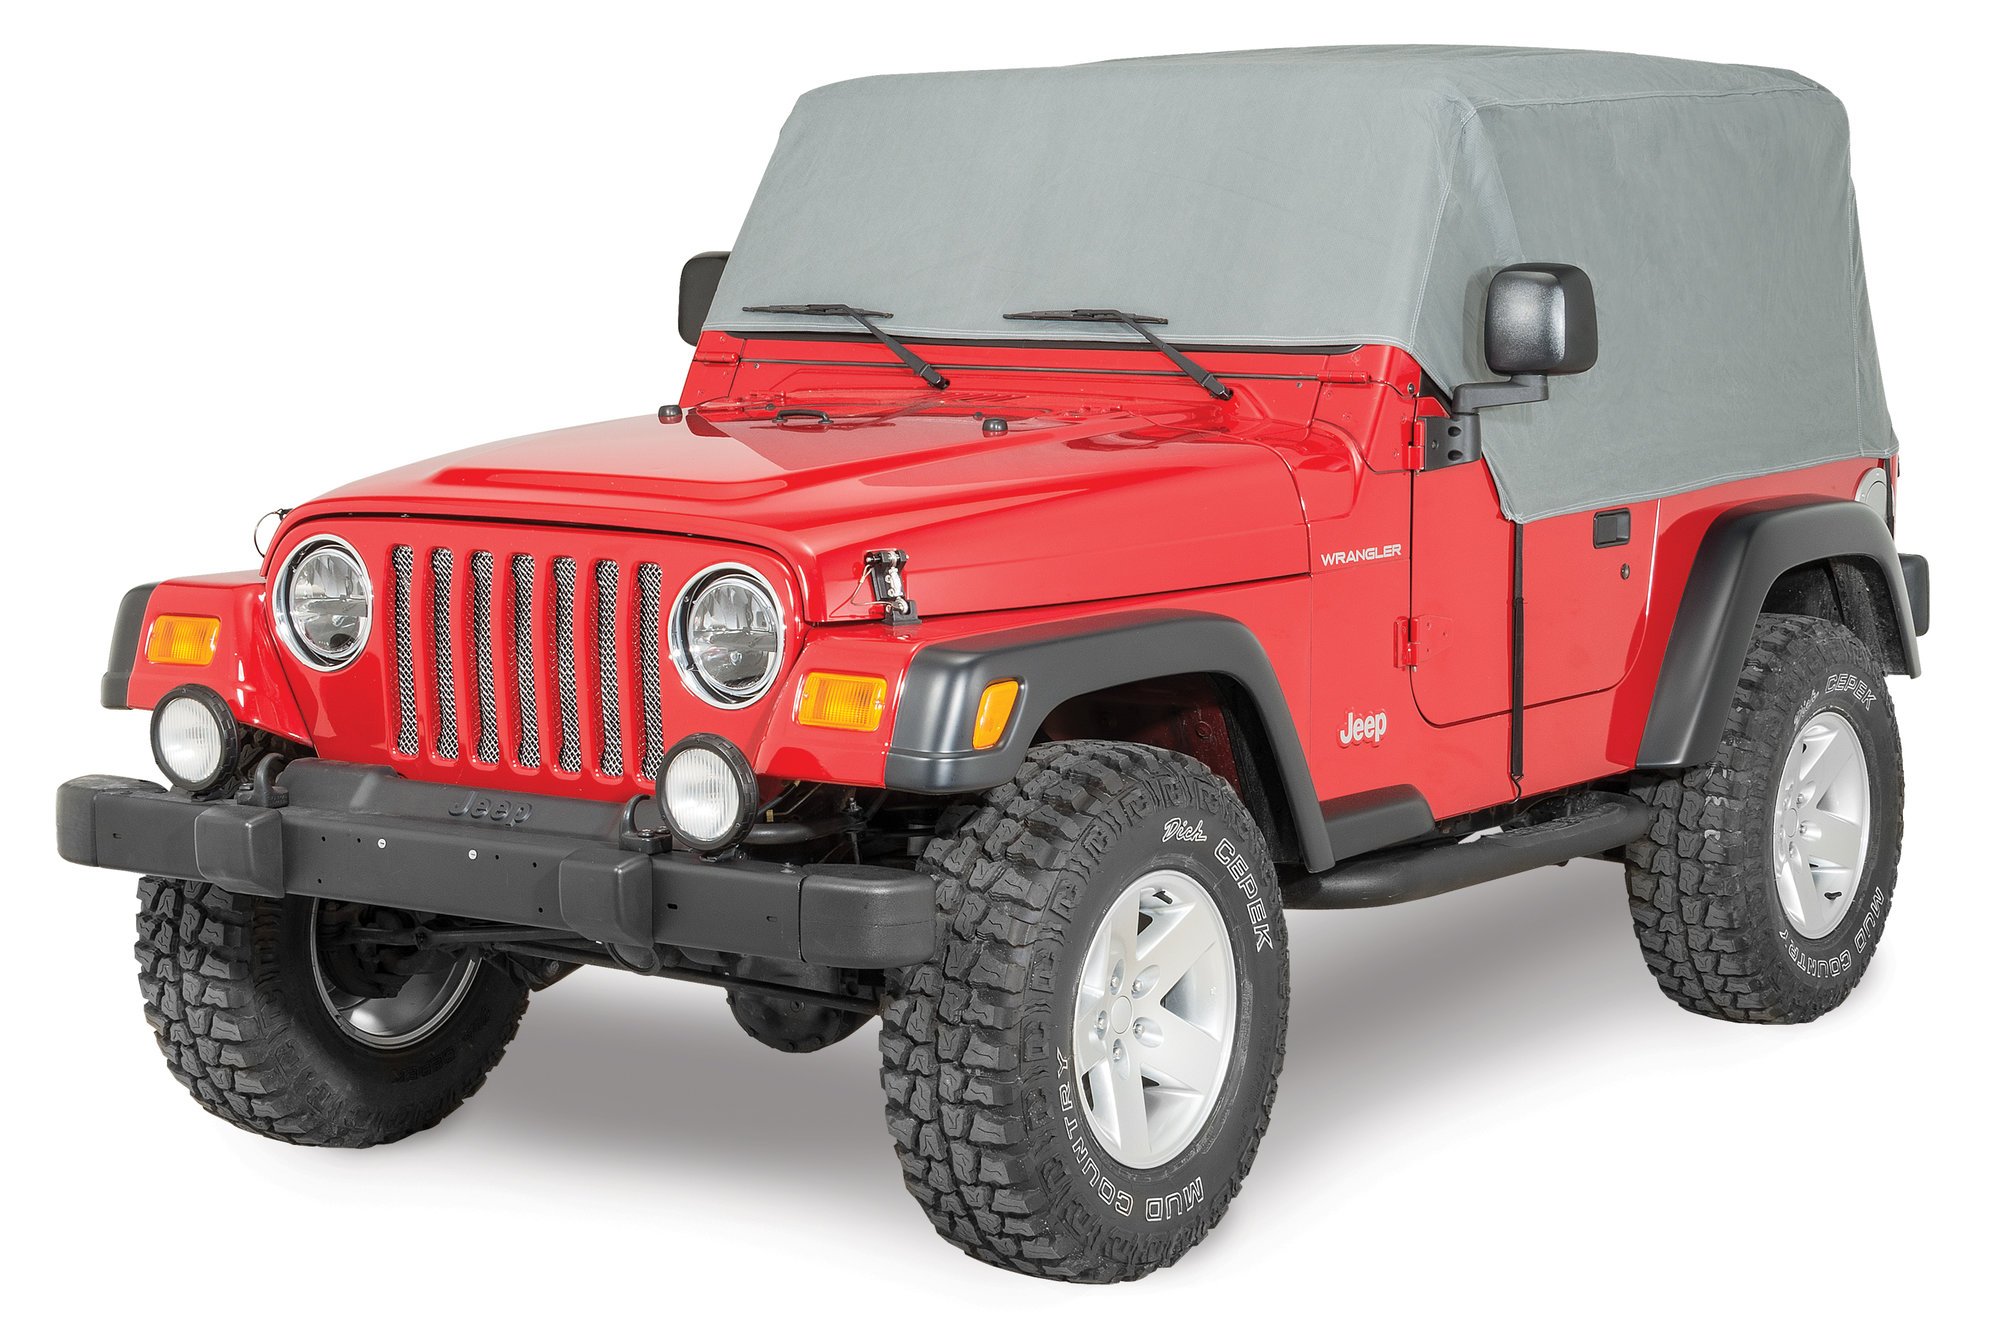 Rampage Products 1160 Cab Cover for 8791 Jeep Wrangler YJ Quadratec